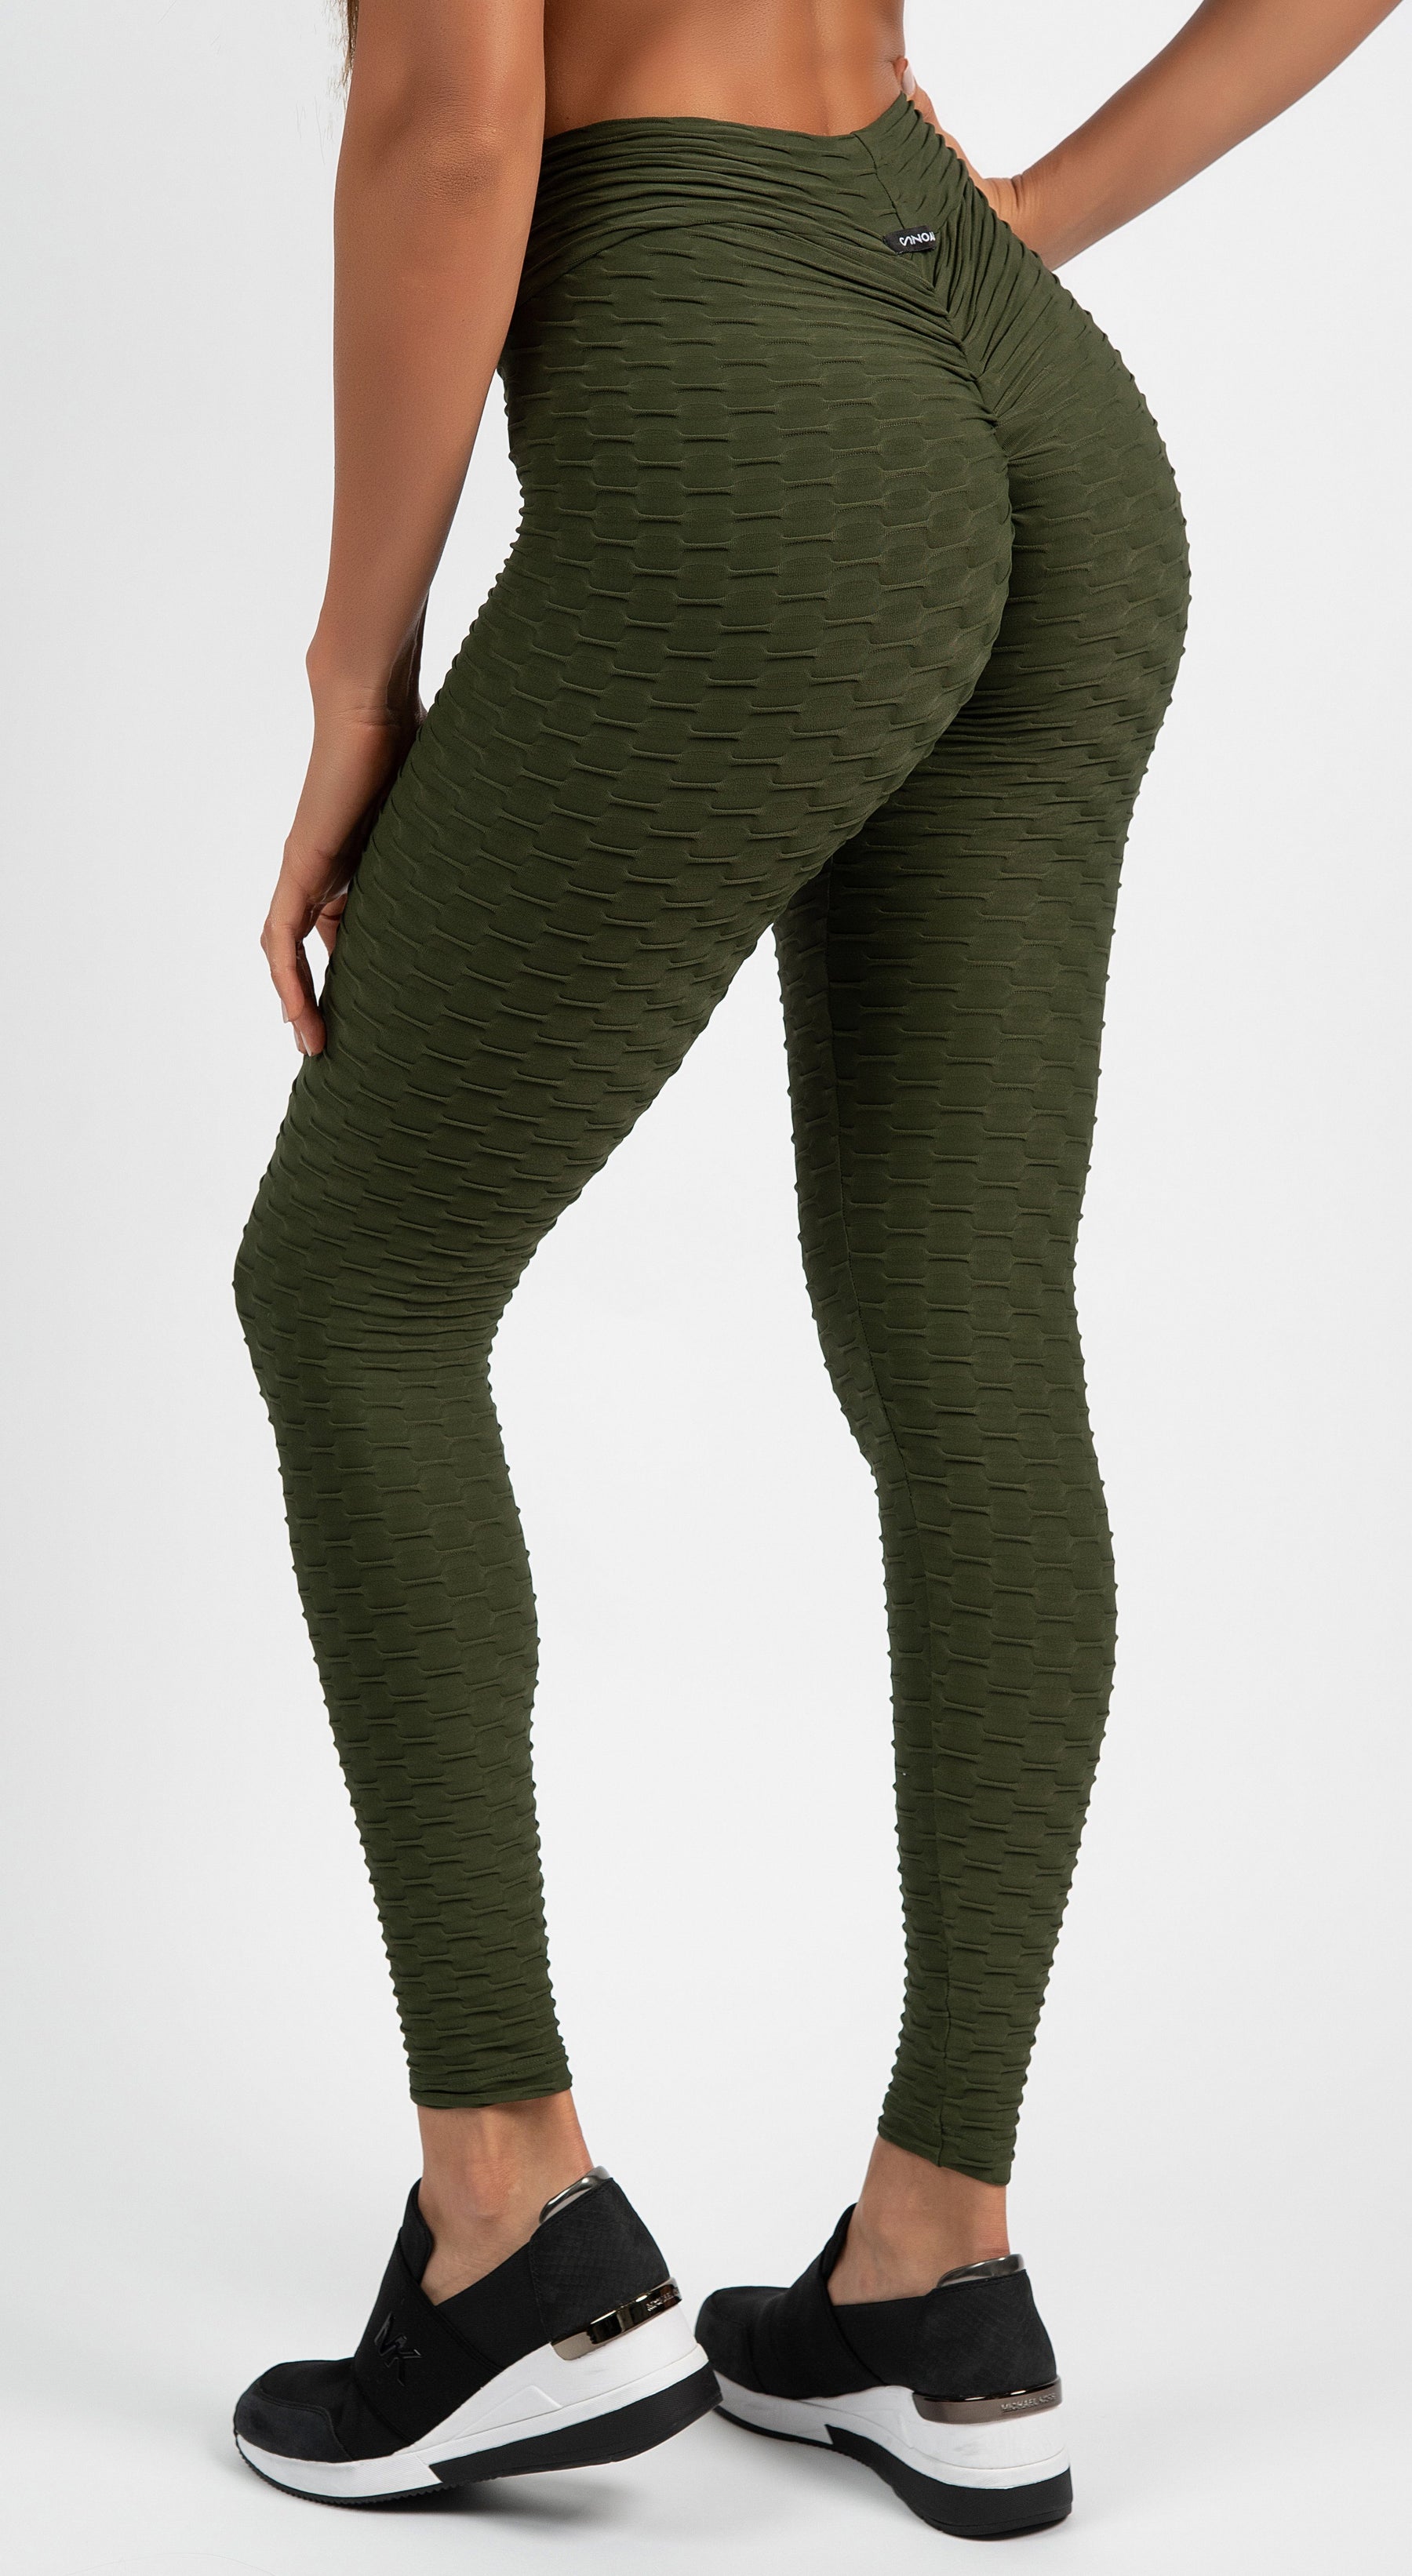 Leggings, Anti Cellulite Honeycomb Textured Scrunch Booty